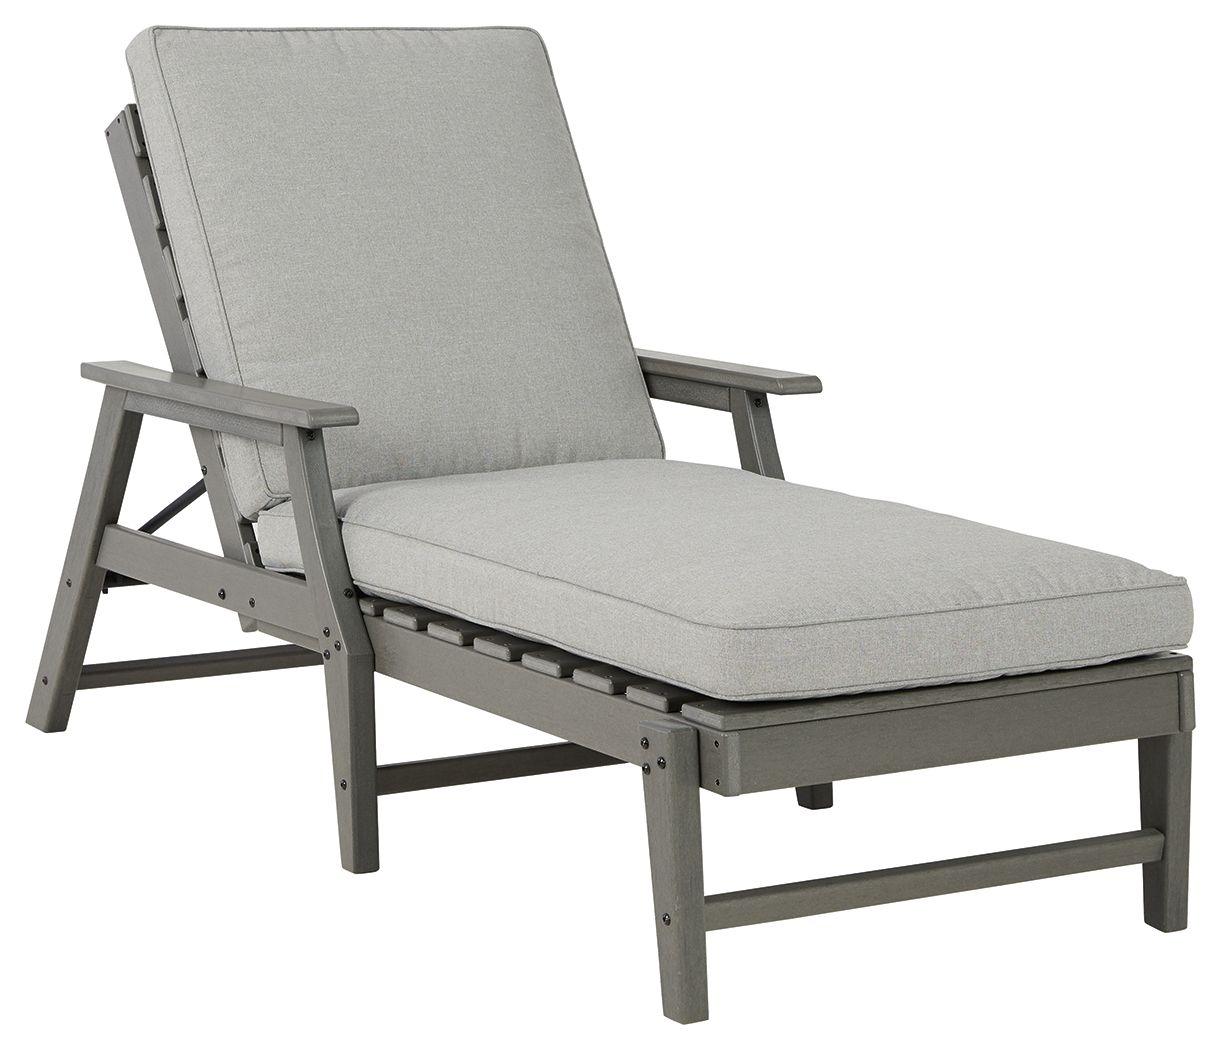 Signature Design by Ashley® - Visola - Gray - Chaise Lounge With Cushion - 5th Avenue Furniture